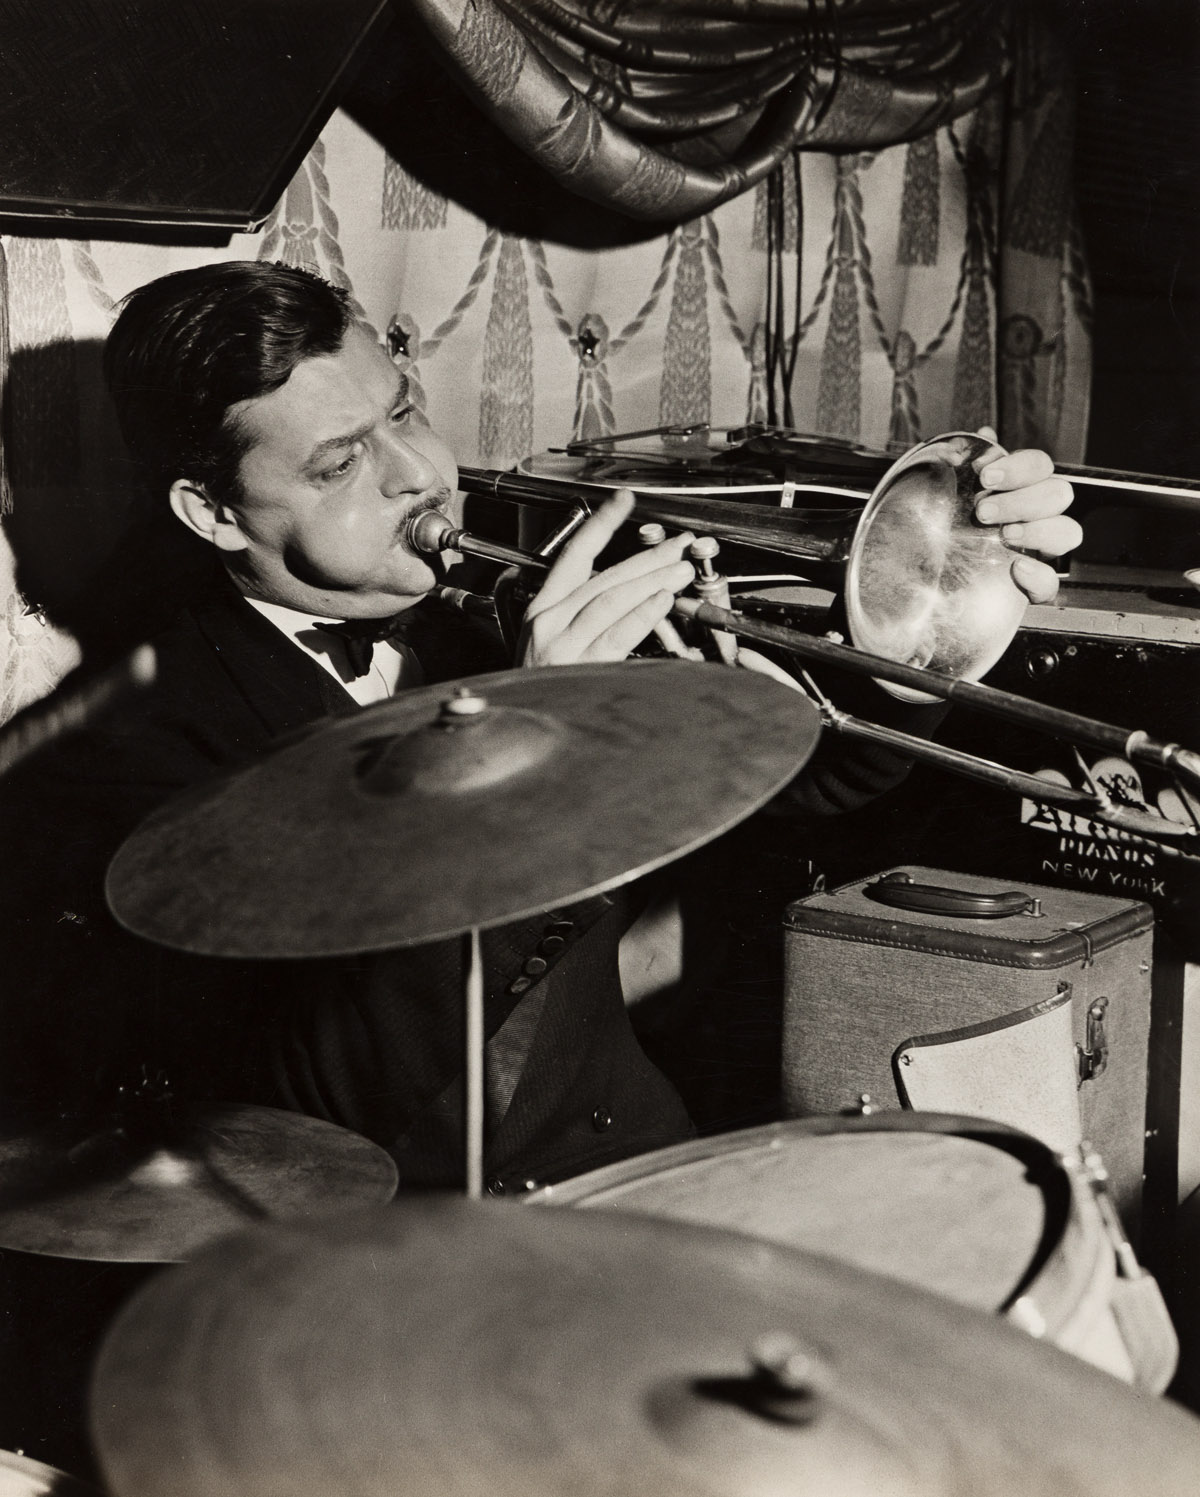 SKIPP ADELMAN & CHARLES PETERSON (1900-1976) A group of 4 jazz photographs, including two of Teddy Wilson by Adelman and one of Peewee